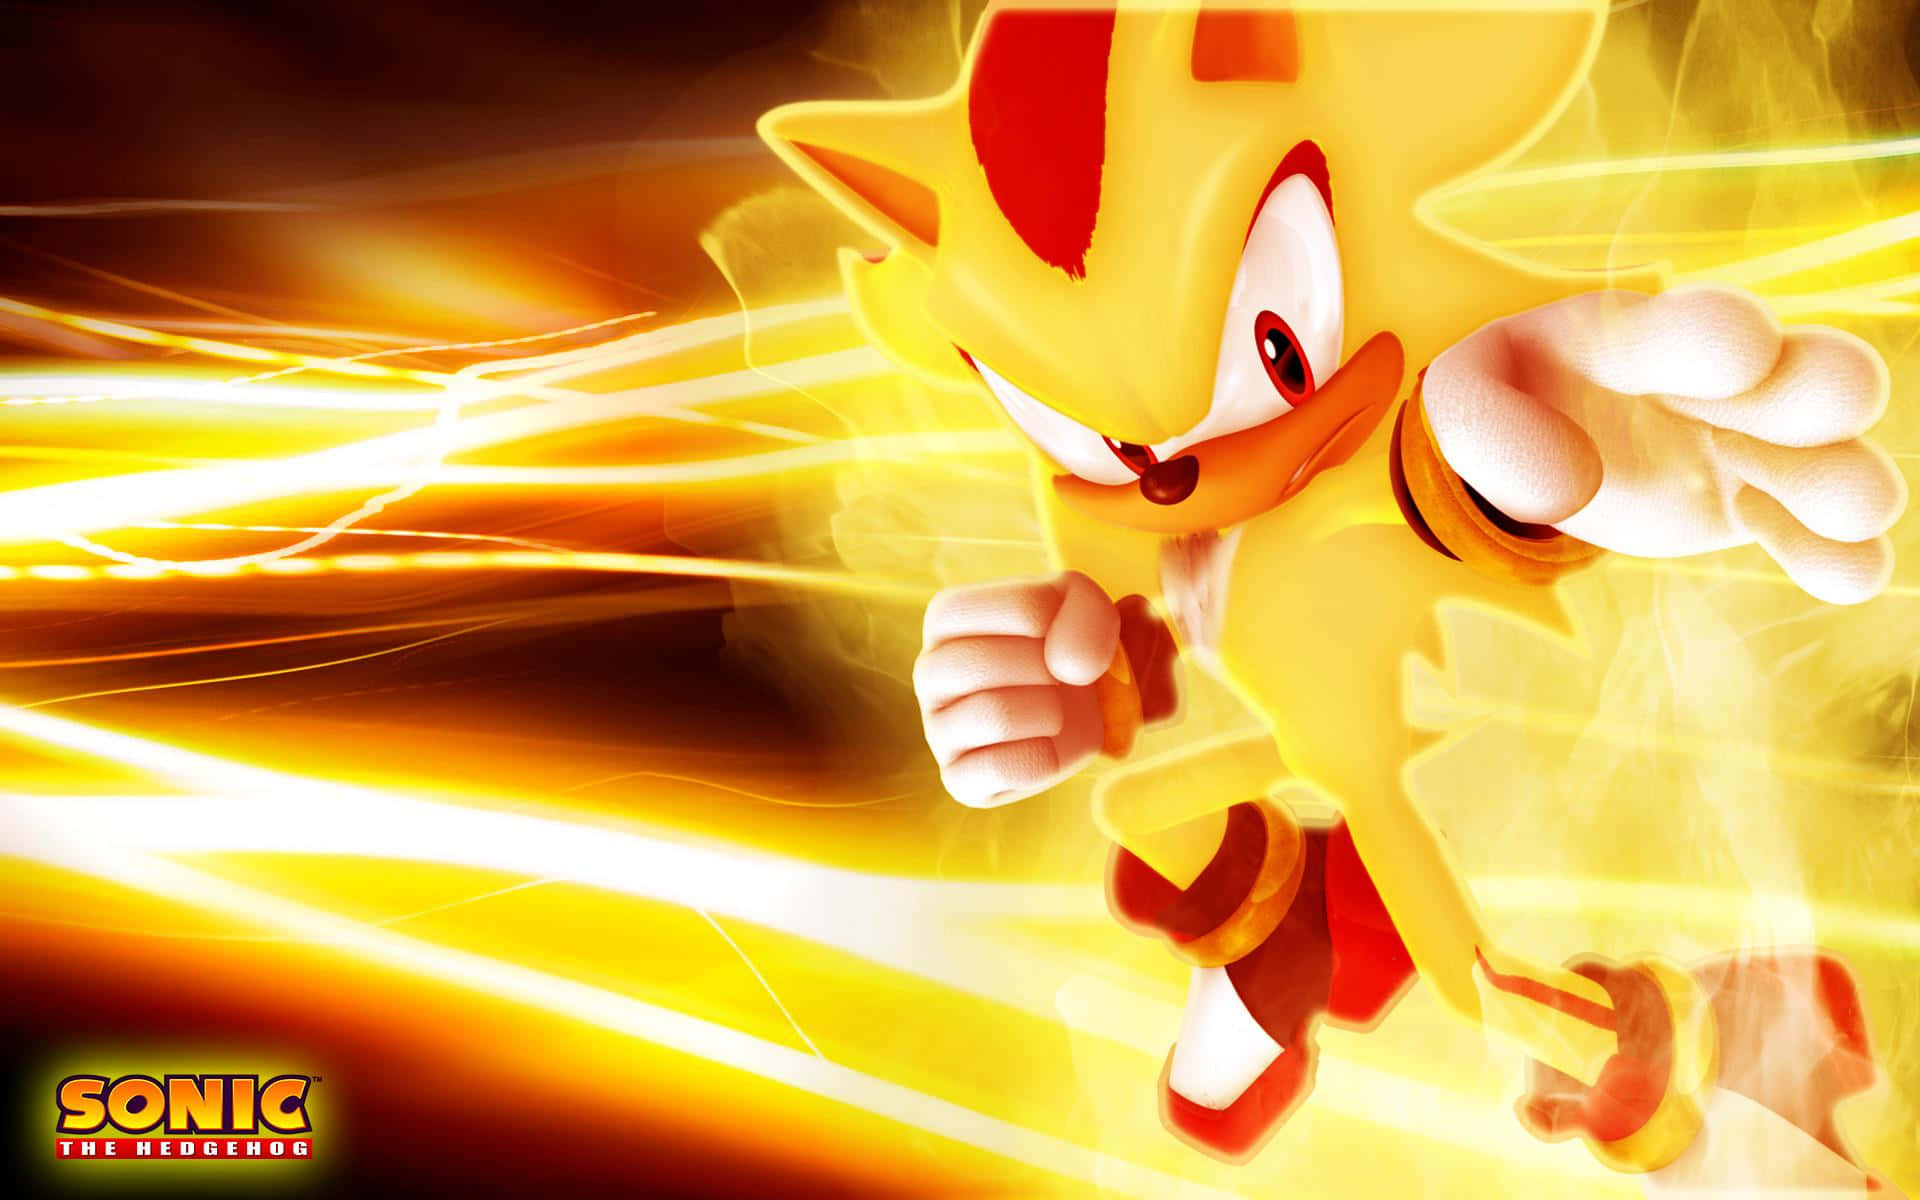 Outrun the Competition with Super Sonic Wallpaper